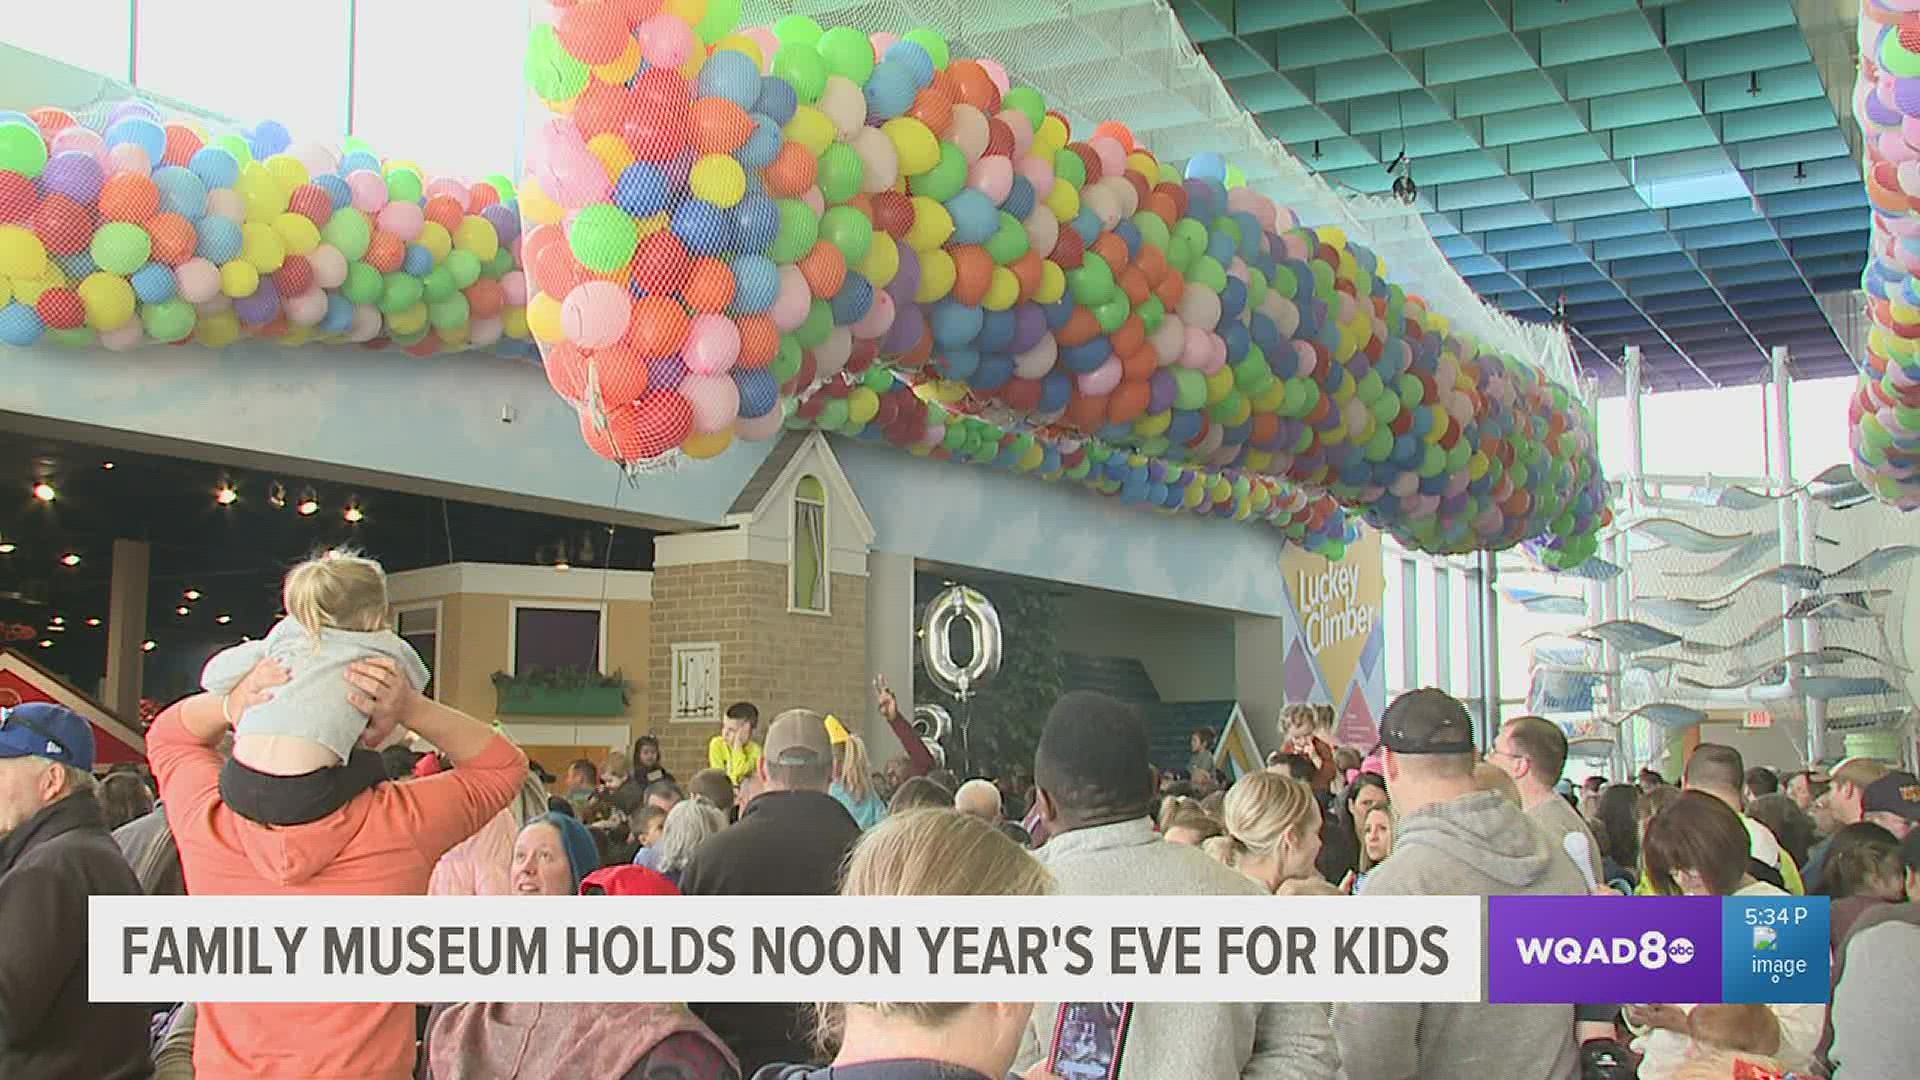 Hundreds of families brought their children to Bettendorf's Family Museum for their "Noon Year's Eve" event, where they got a head start on ringing in the new year.